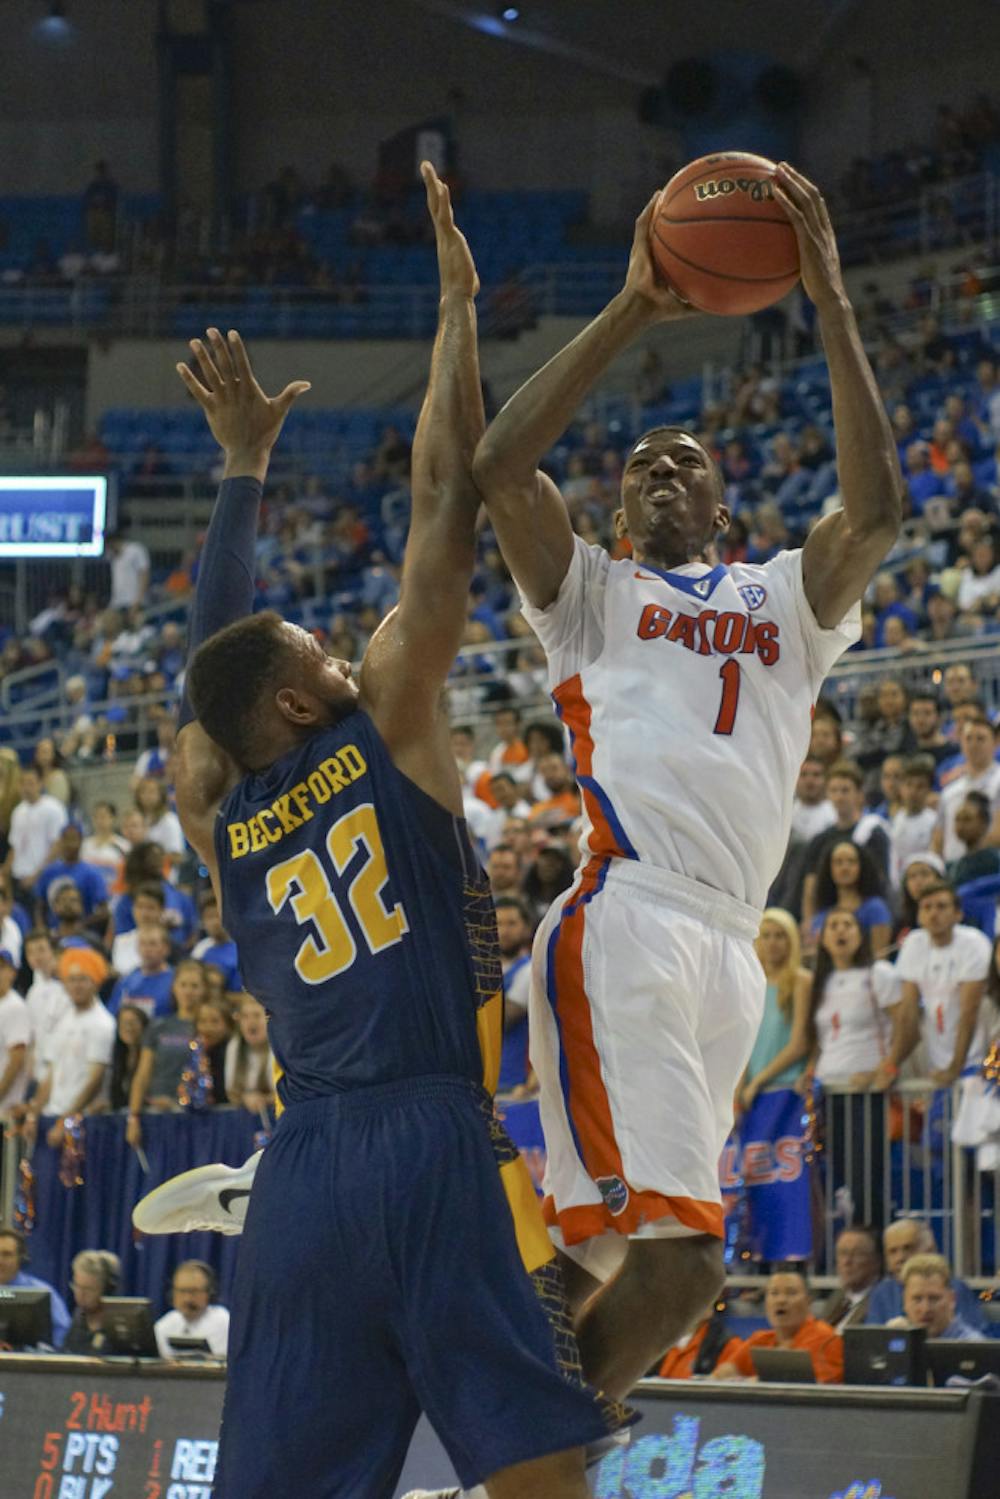 <p>UF swingman Devon Walker jumps for a layup during the second half of Florida's 104-54 win against North Carolina A&amp;T on Nov. 16, 2015, in the O'Connell Center.</p>